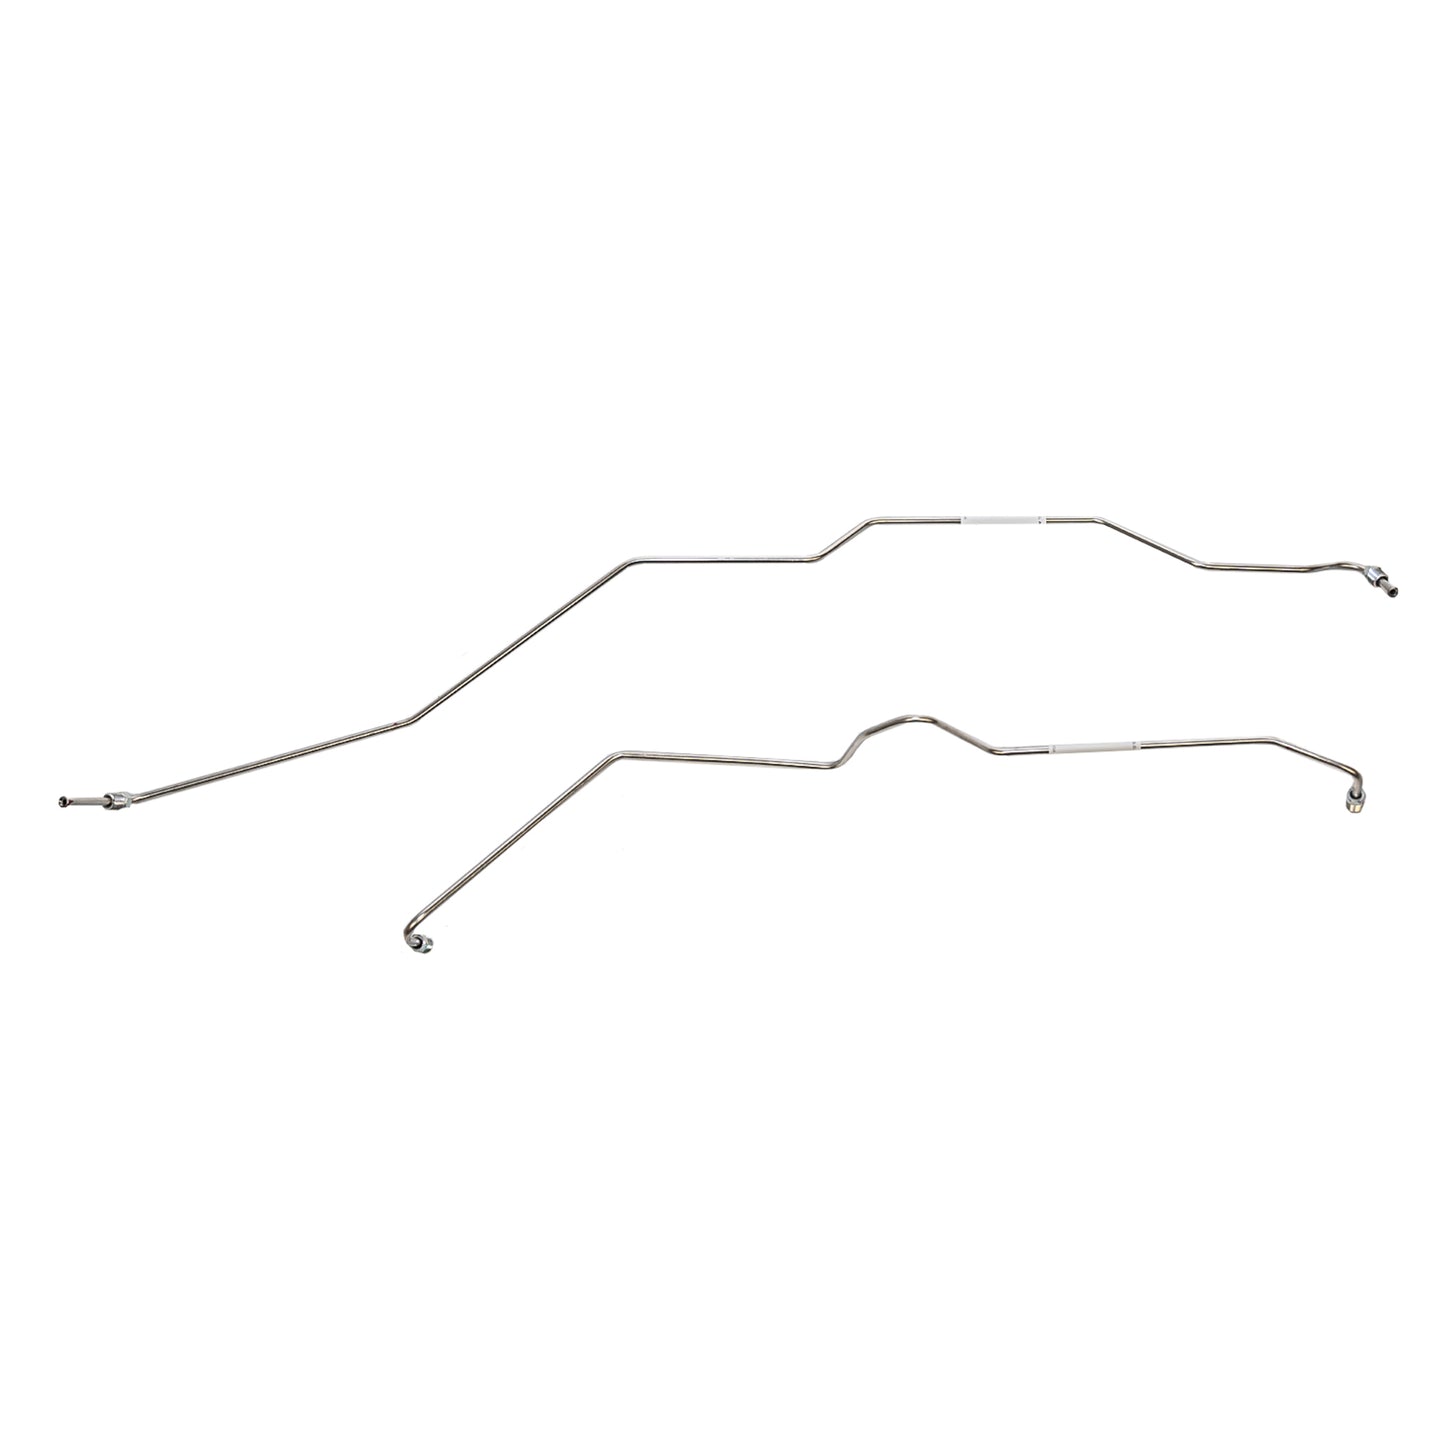 Chevy Rear Axle Brake Line Kit; Fine Lines-TRA0802SS